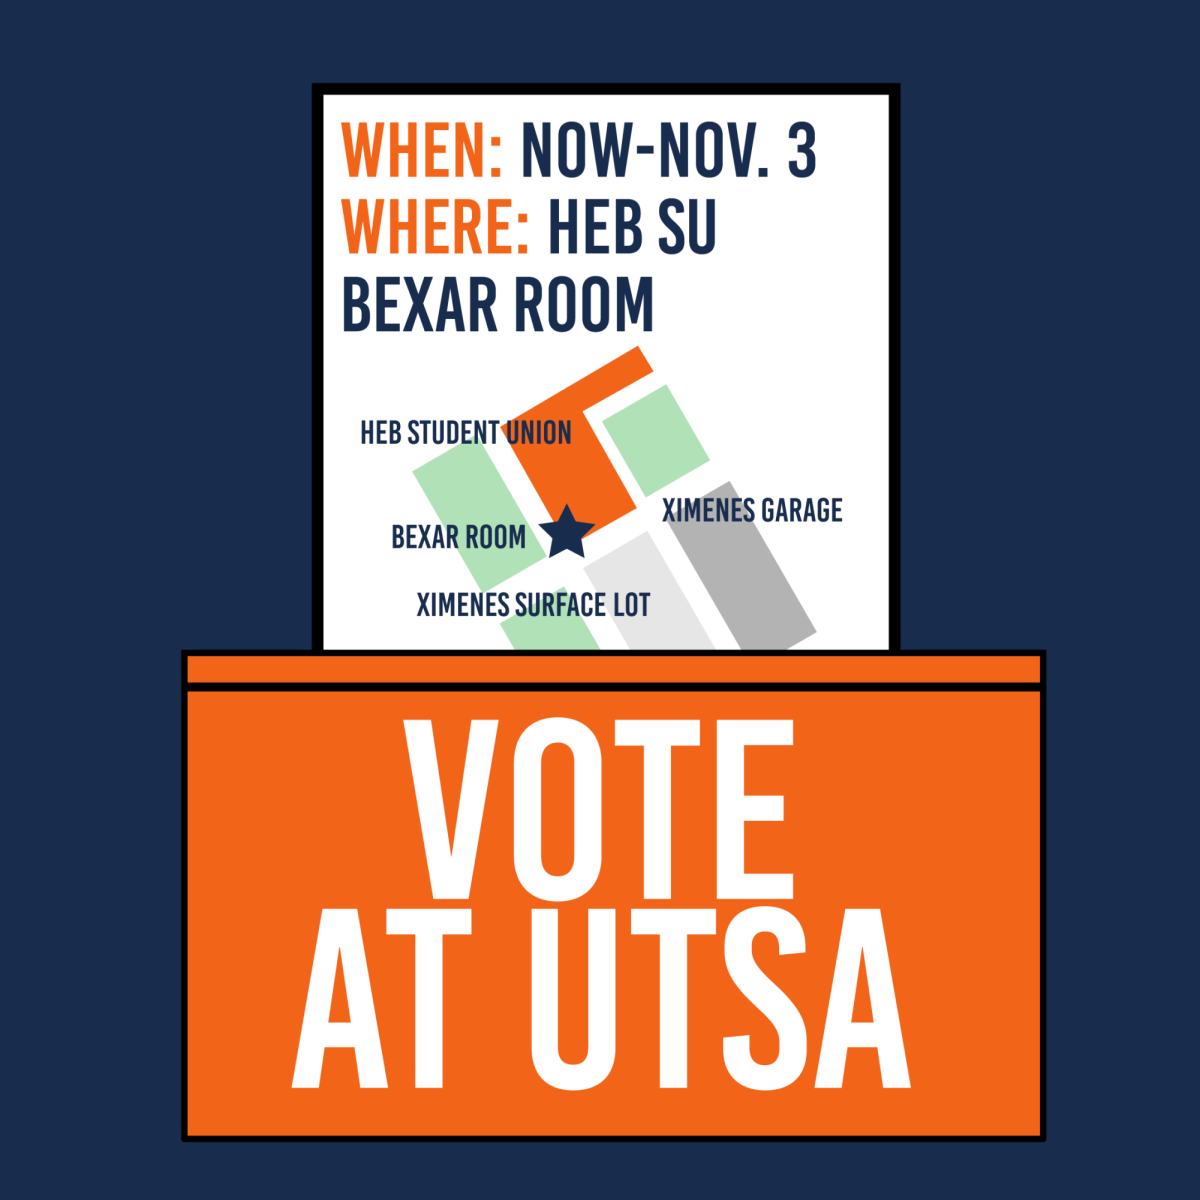 Early voting on Main Campus until Nov. 3